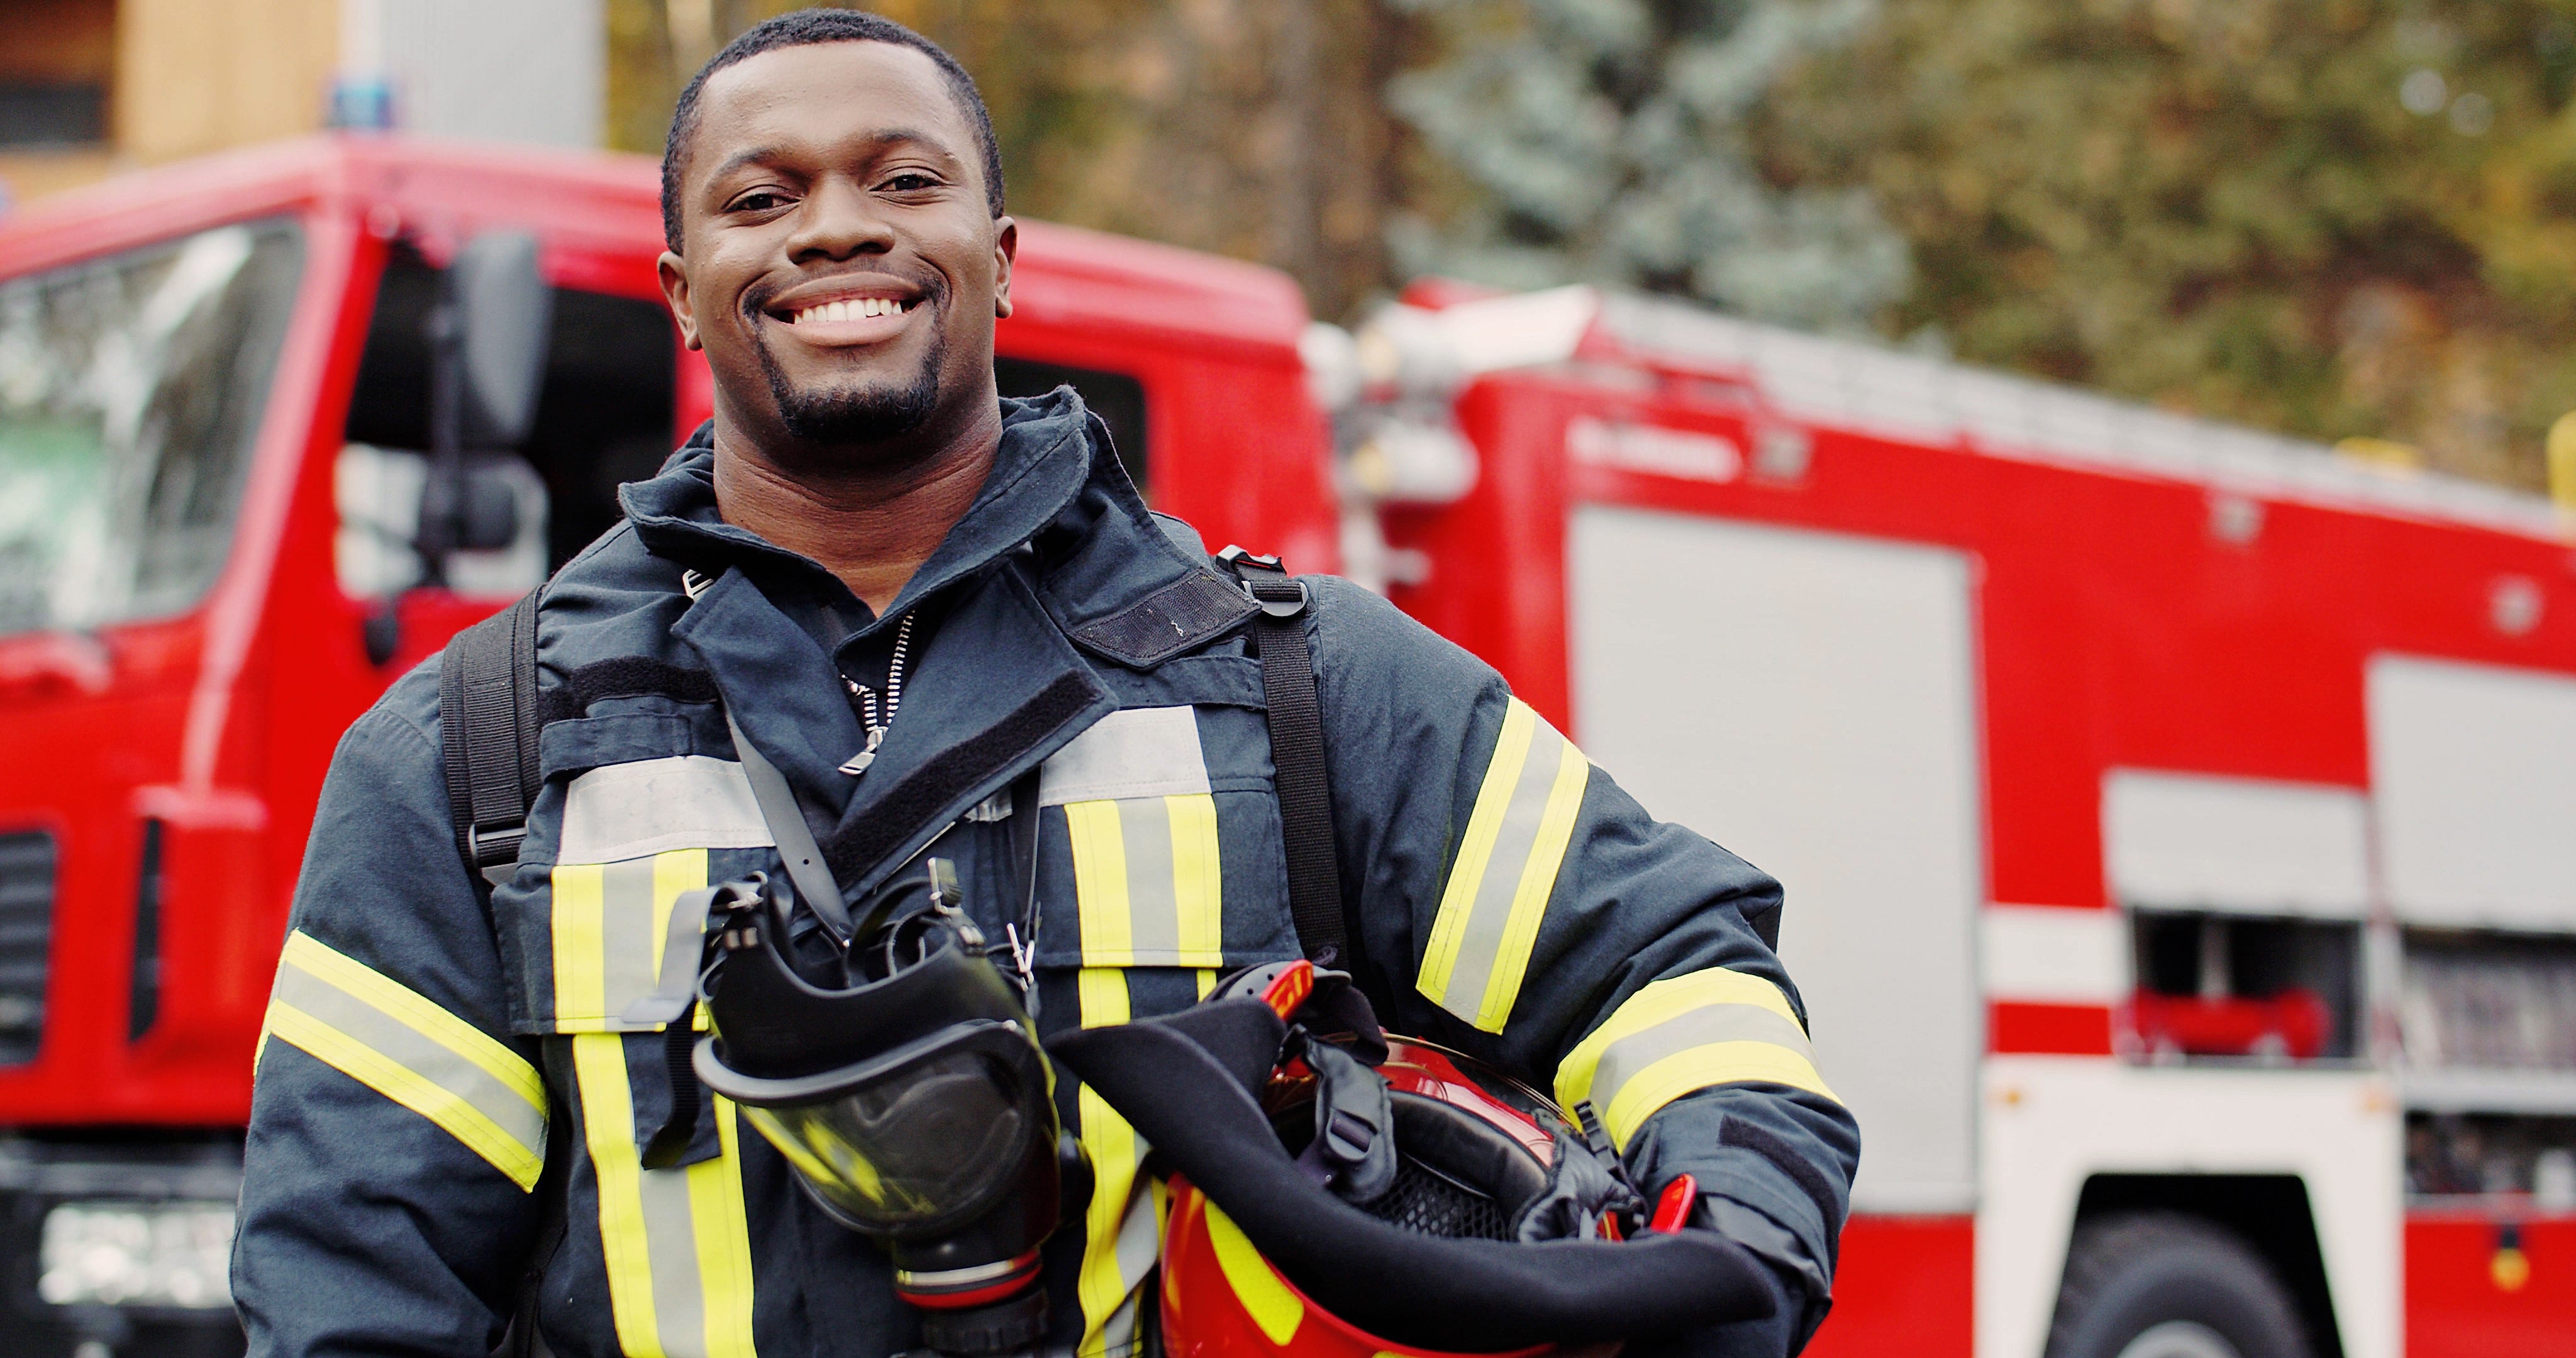 Ideal Tips About How To Become A Career Firefighter - Policebaby25